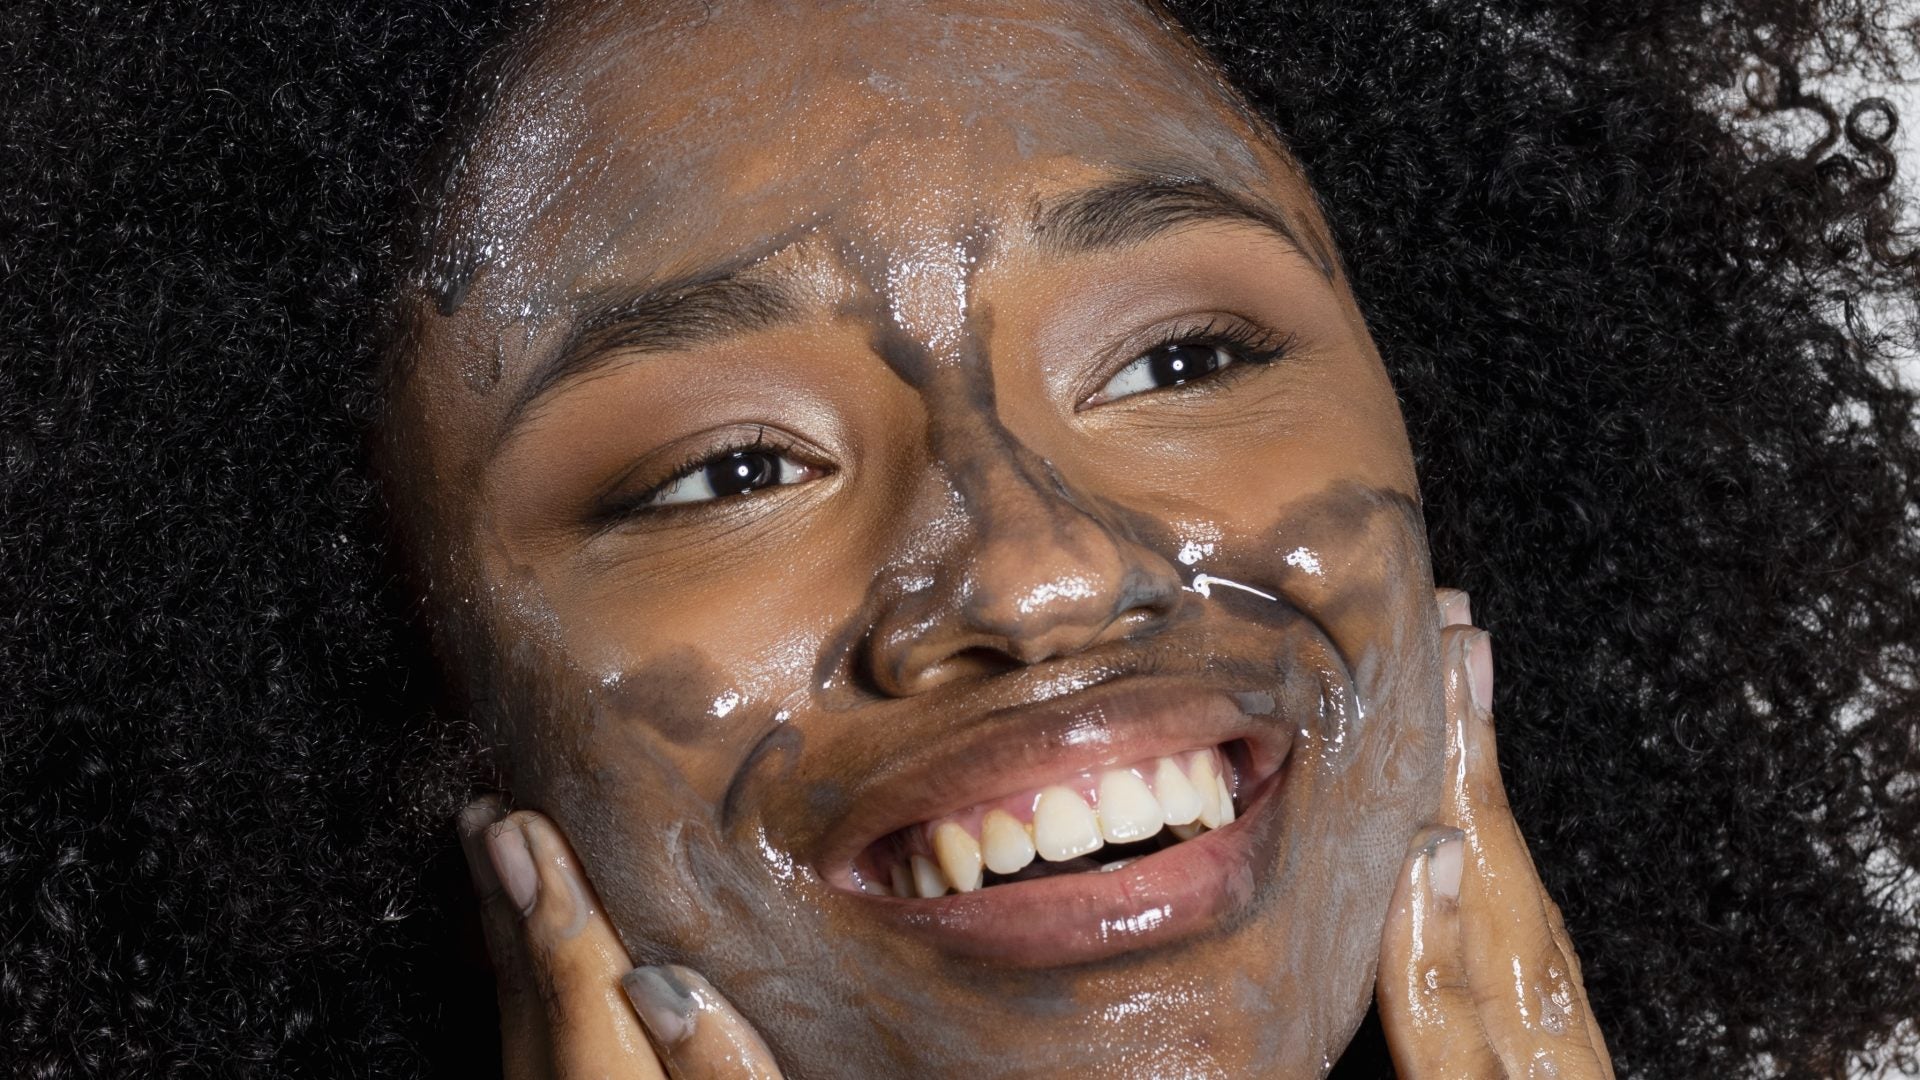 How To Build A Targeted Skincare Routine